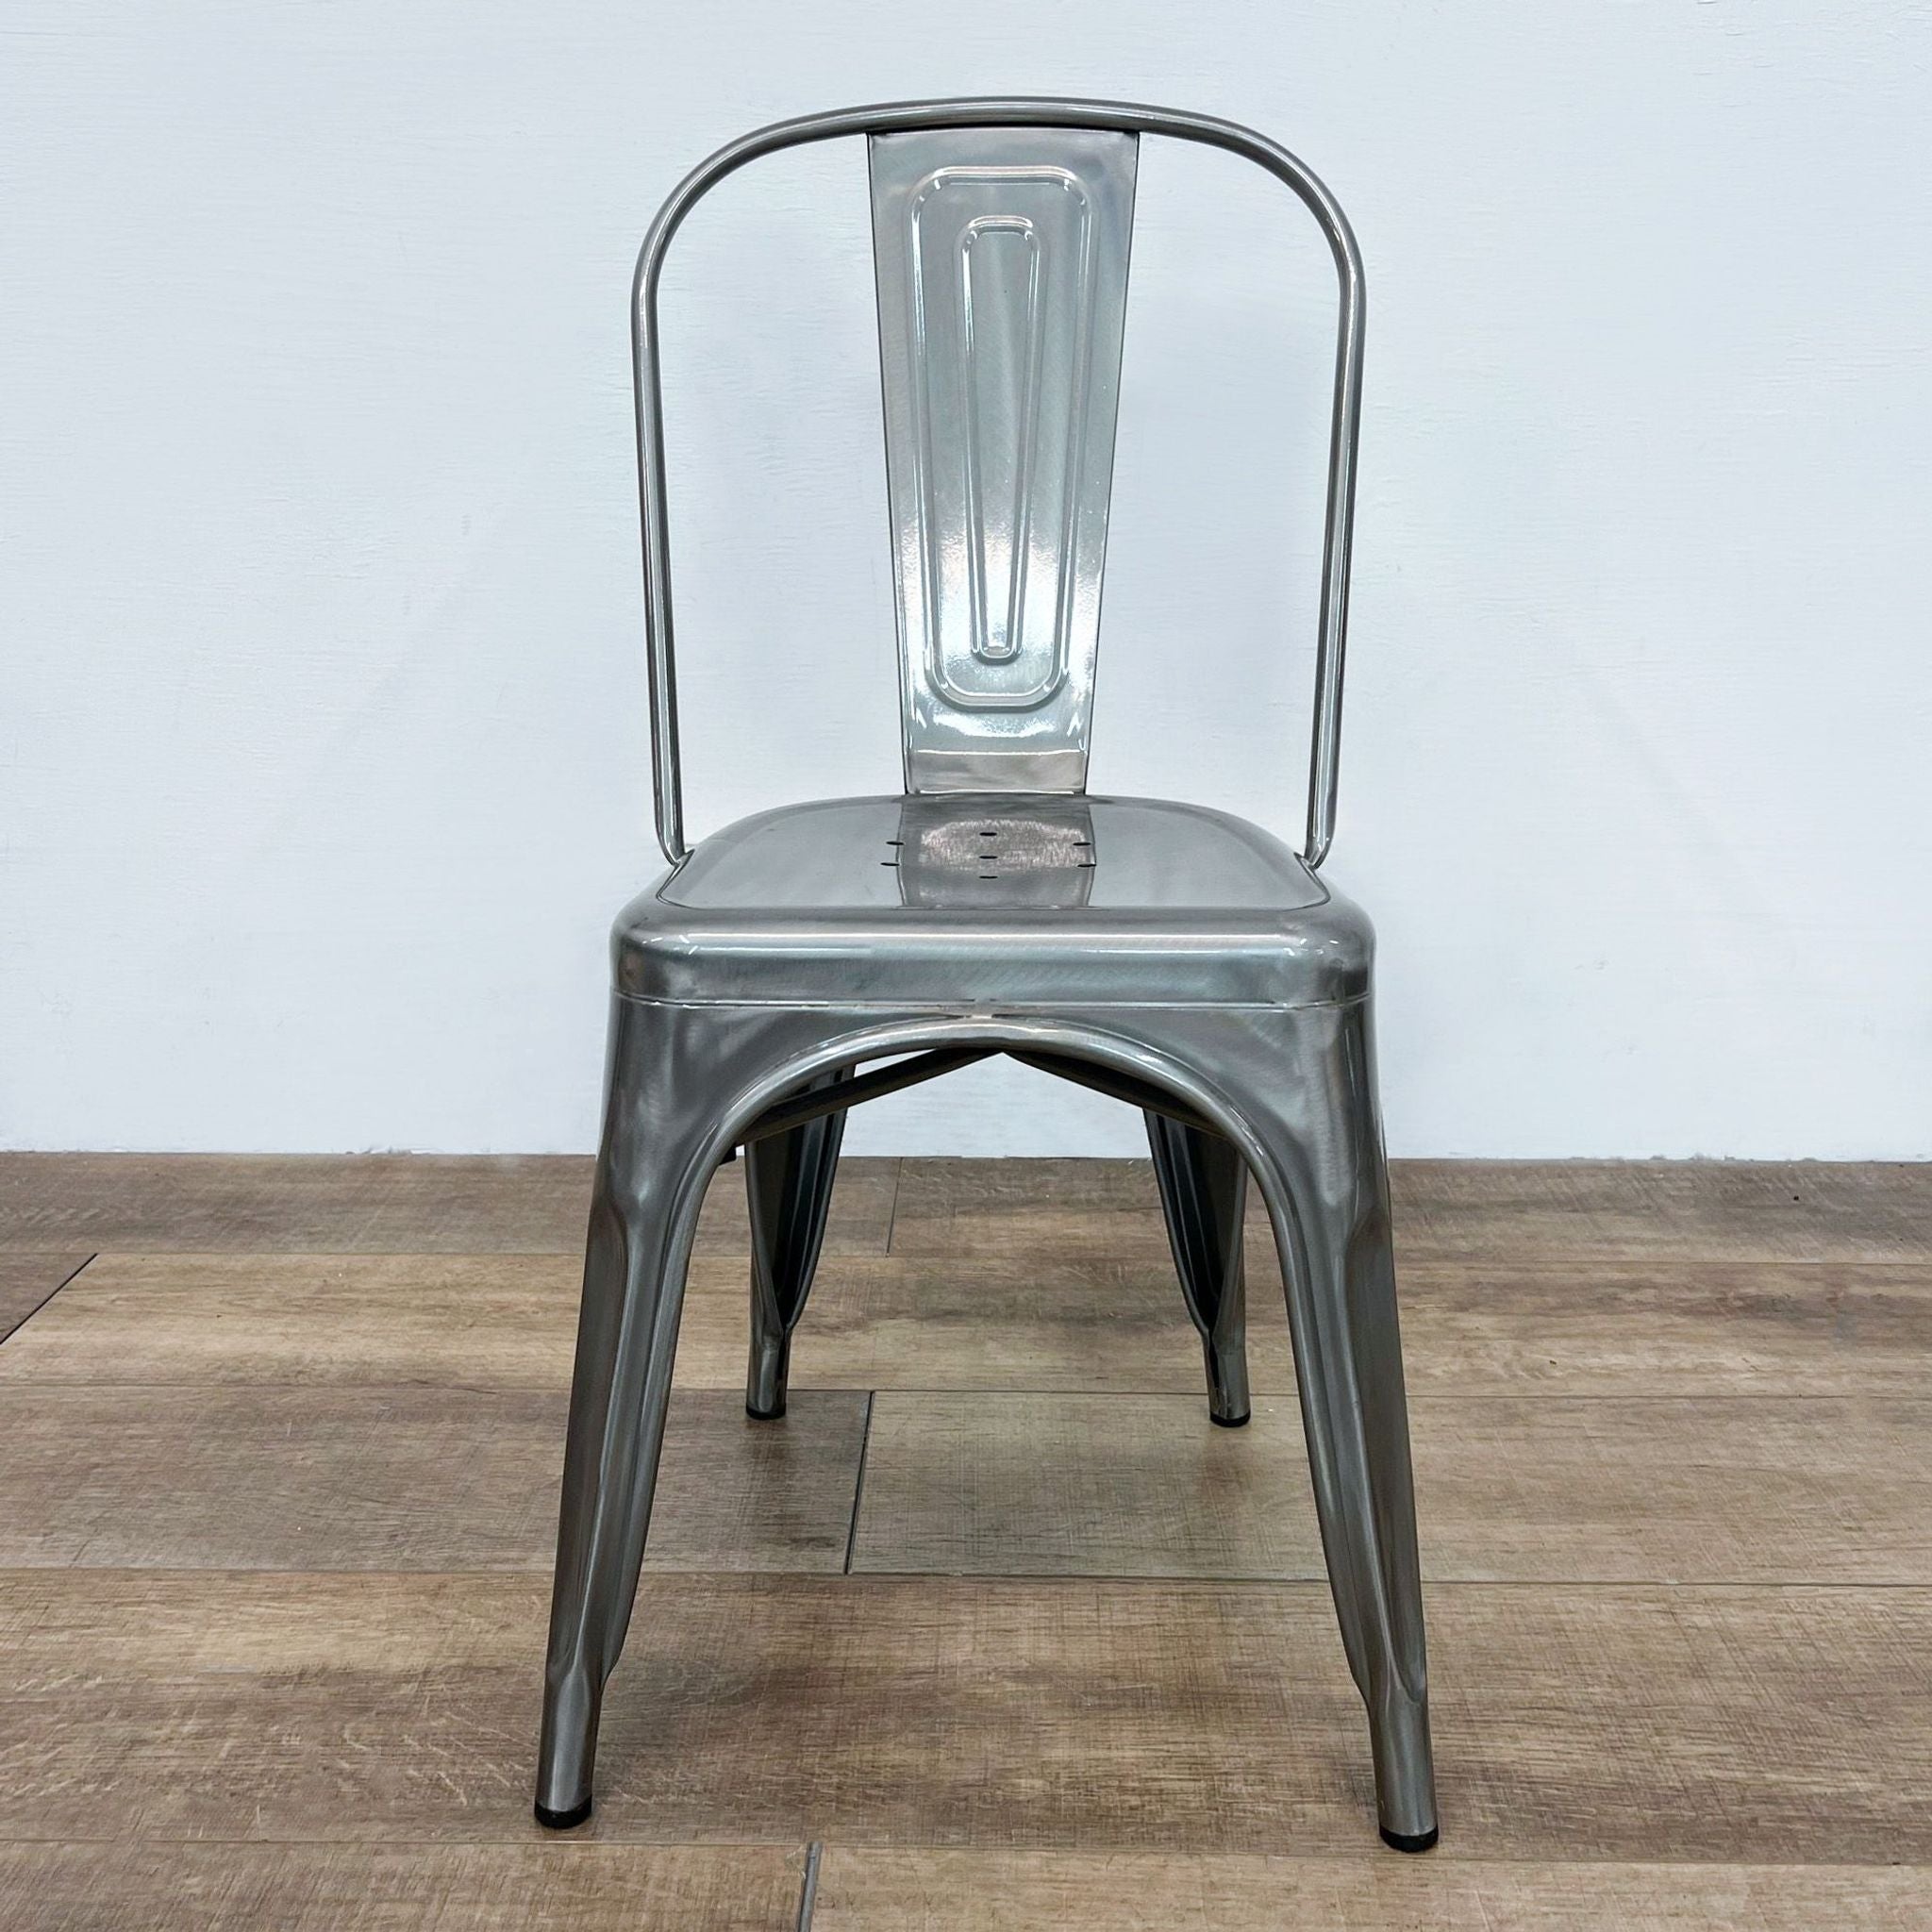 Reperch industrial metal side chair with curved back and tapered legs, suitable for indoor/outdoor use, stackable design.